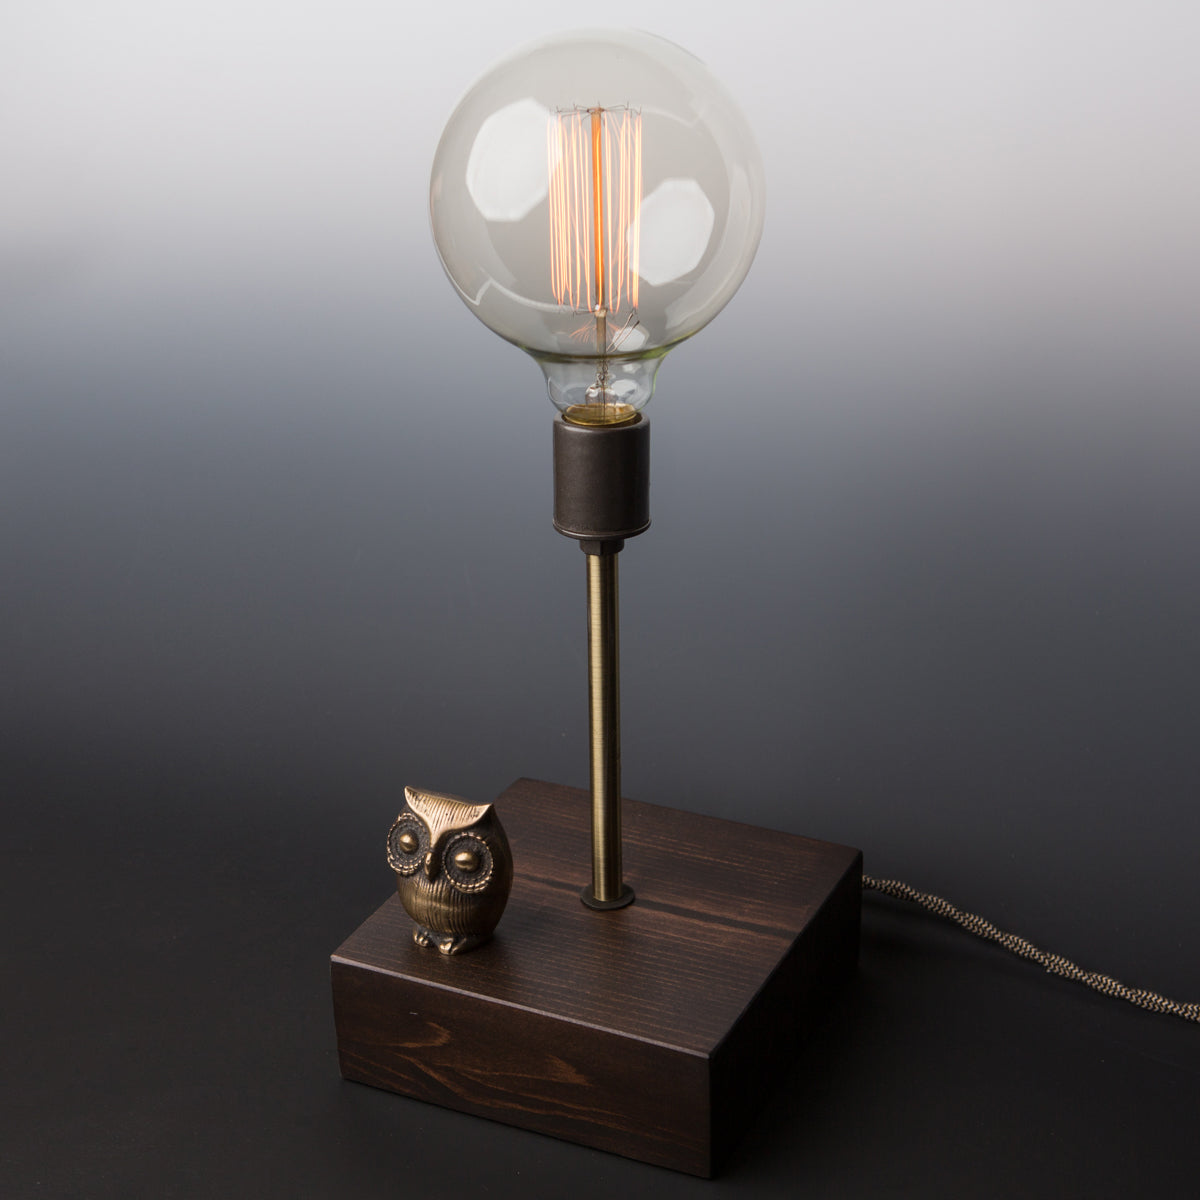 Mr. Owl ‘Touch-Controlled’ Lamp